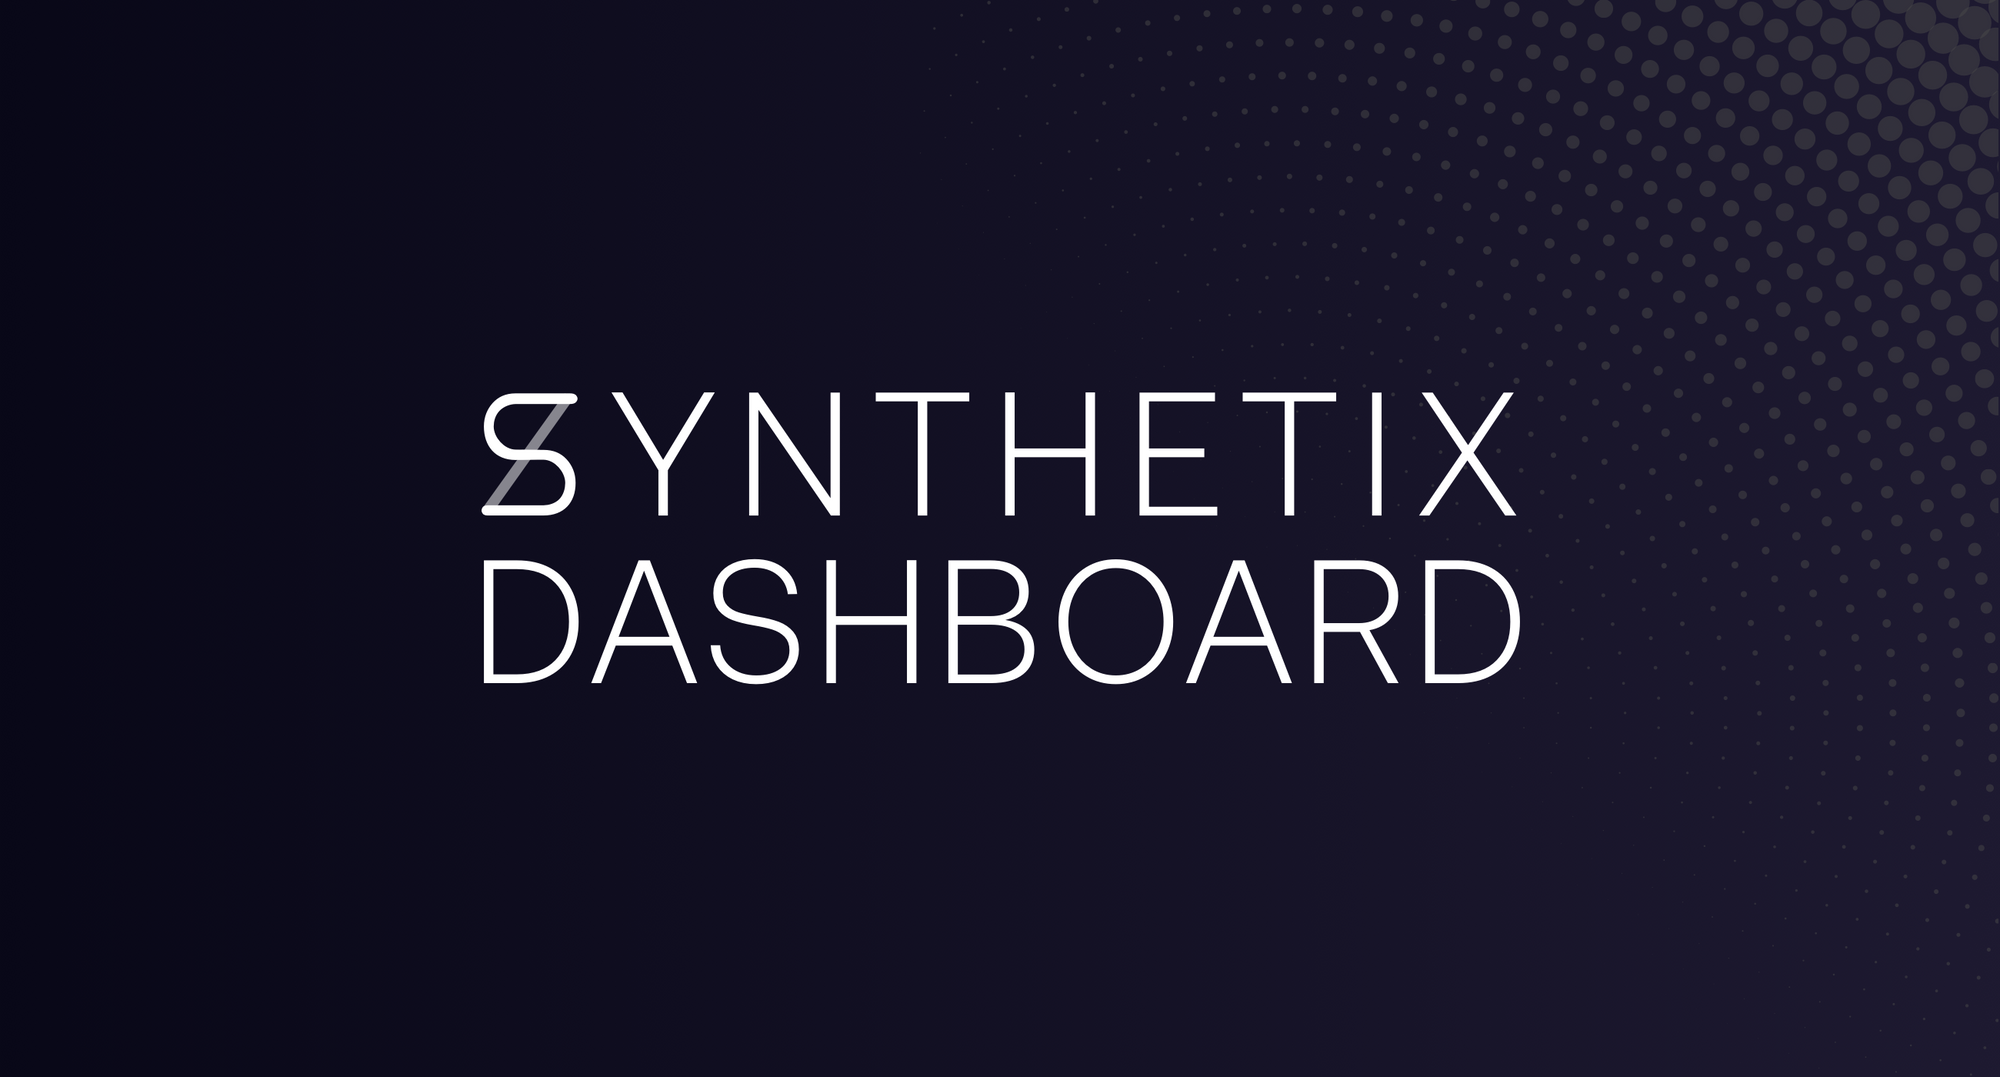 The new Synthetix Dashboard is now live!